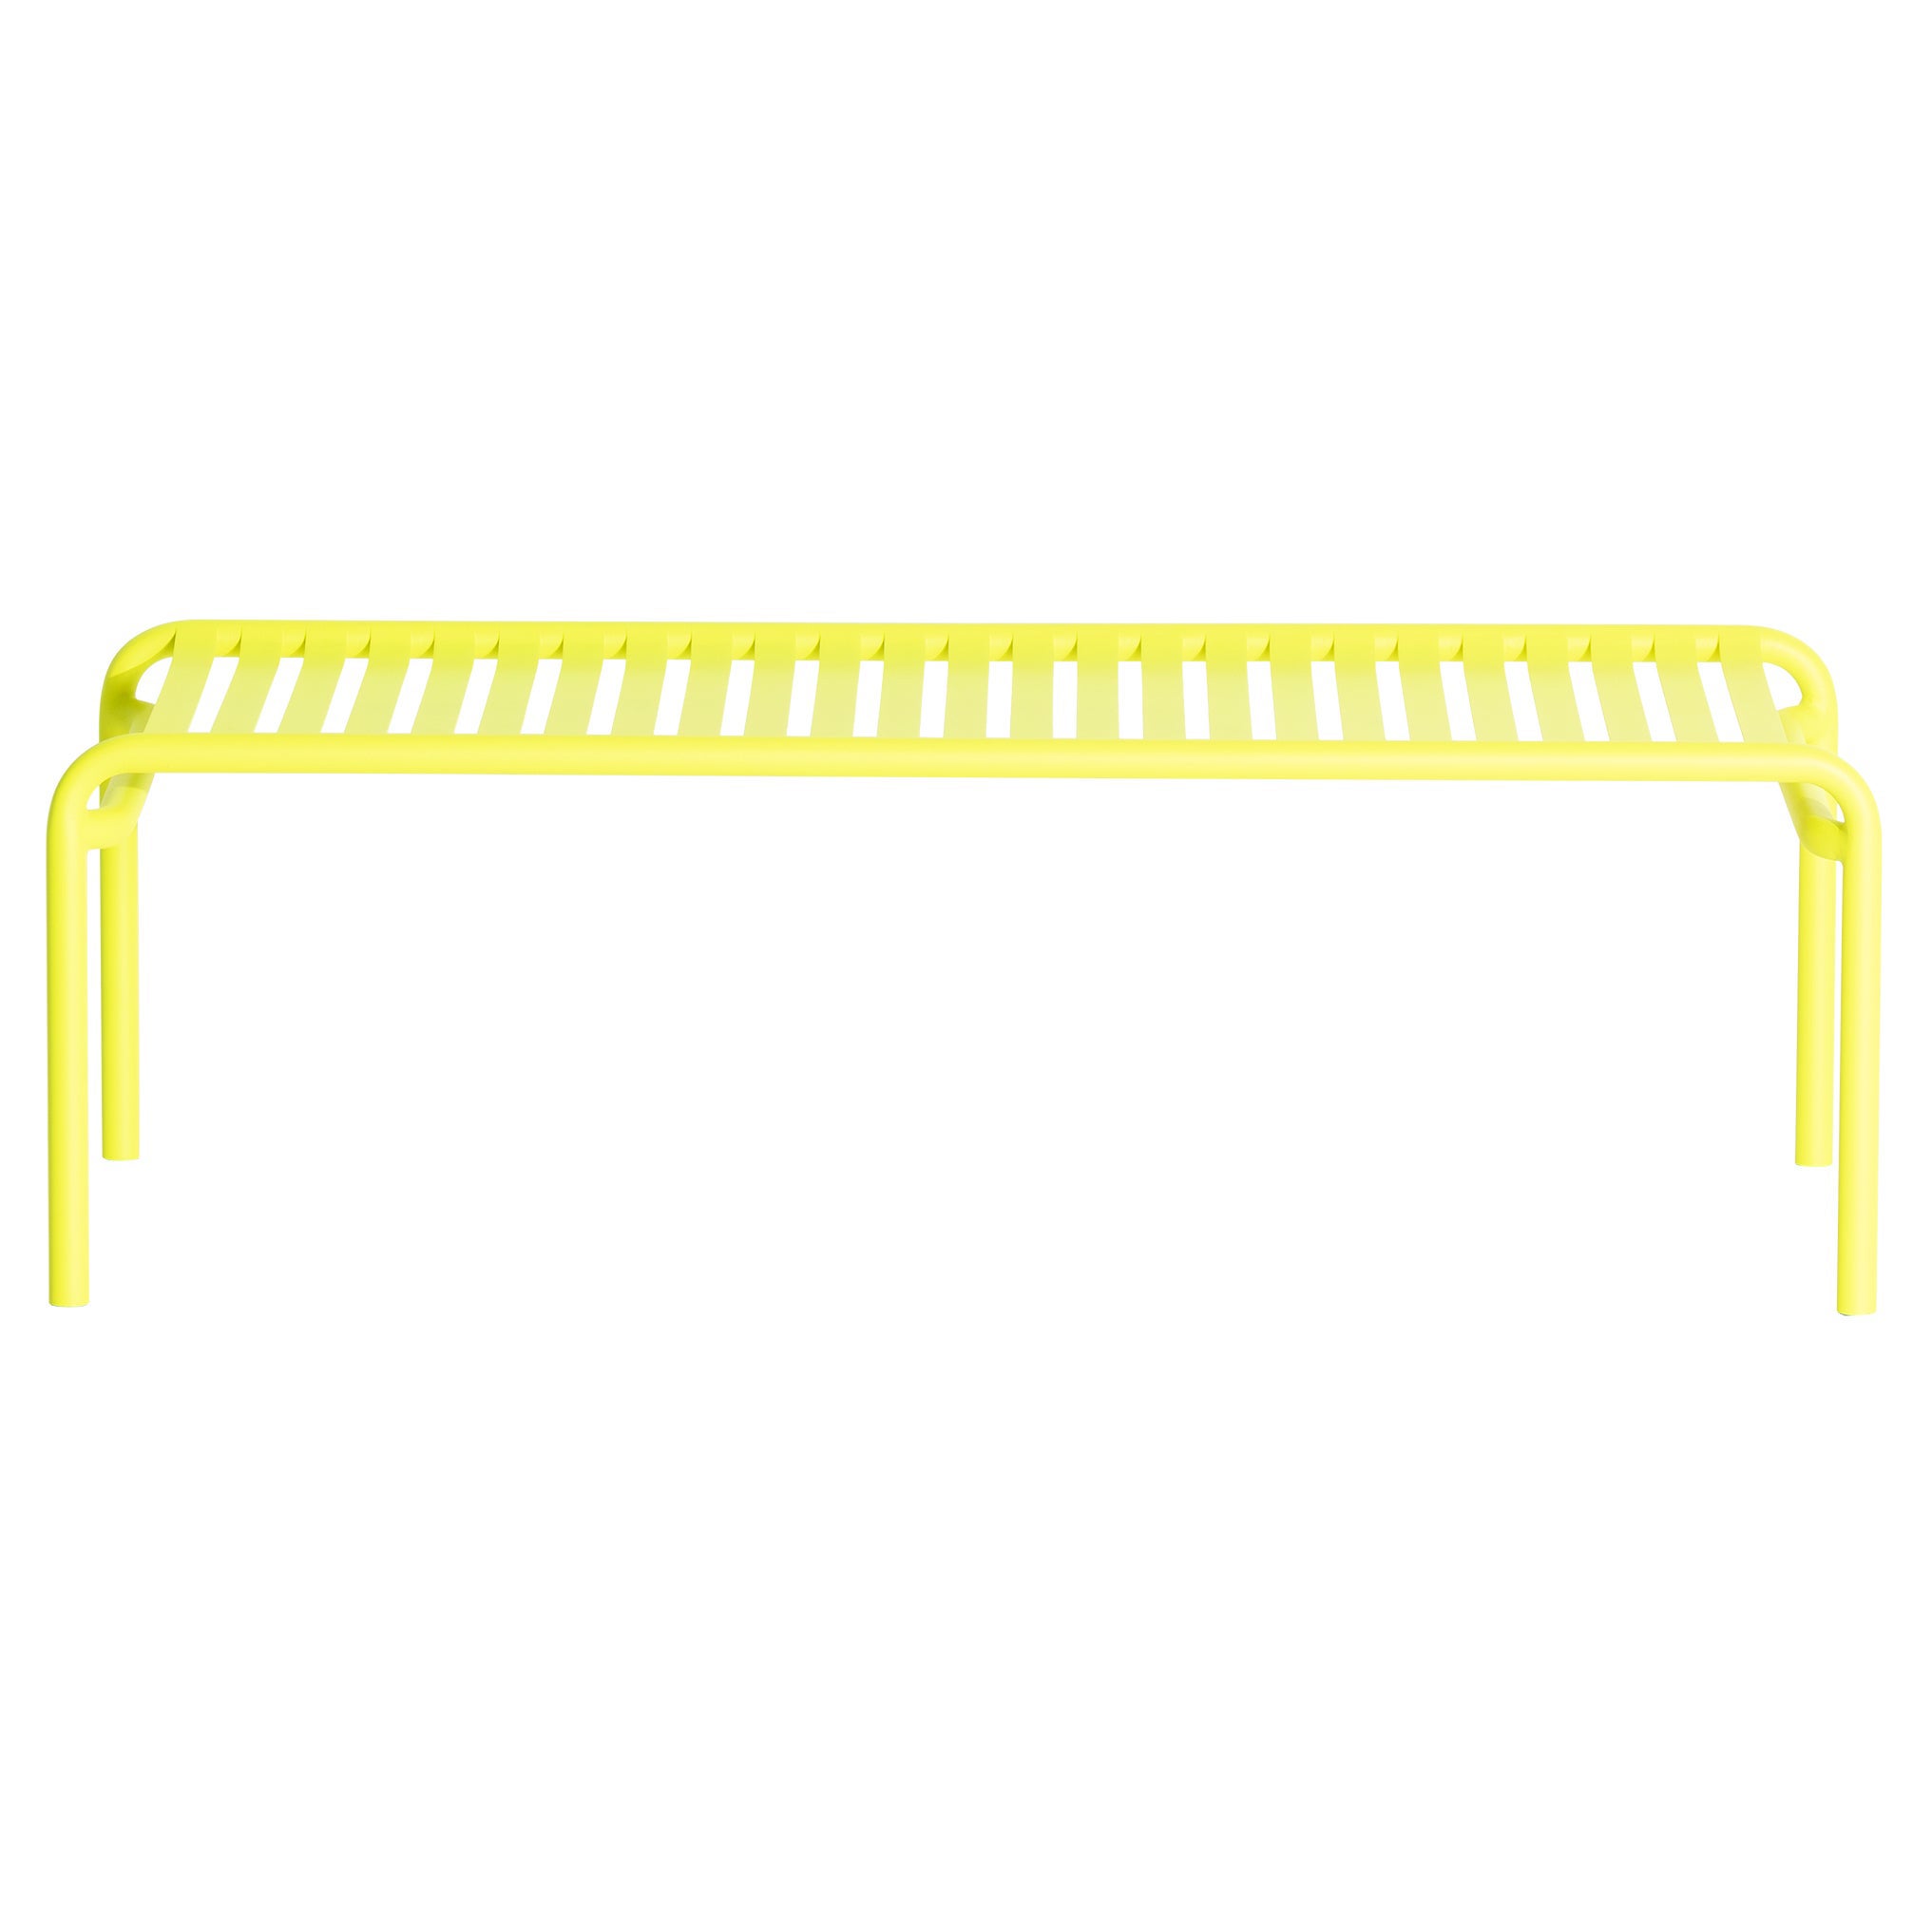 Petite Friture Week-End Long Coffee Table in Yellow Aluminium, 2017 For Sale